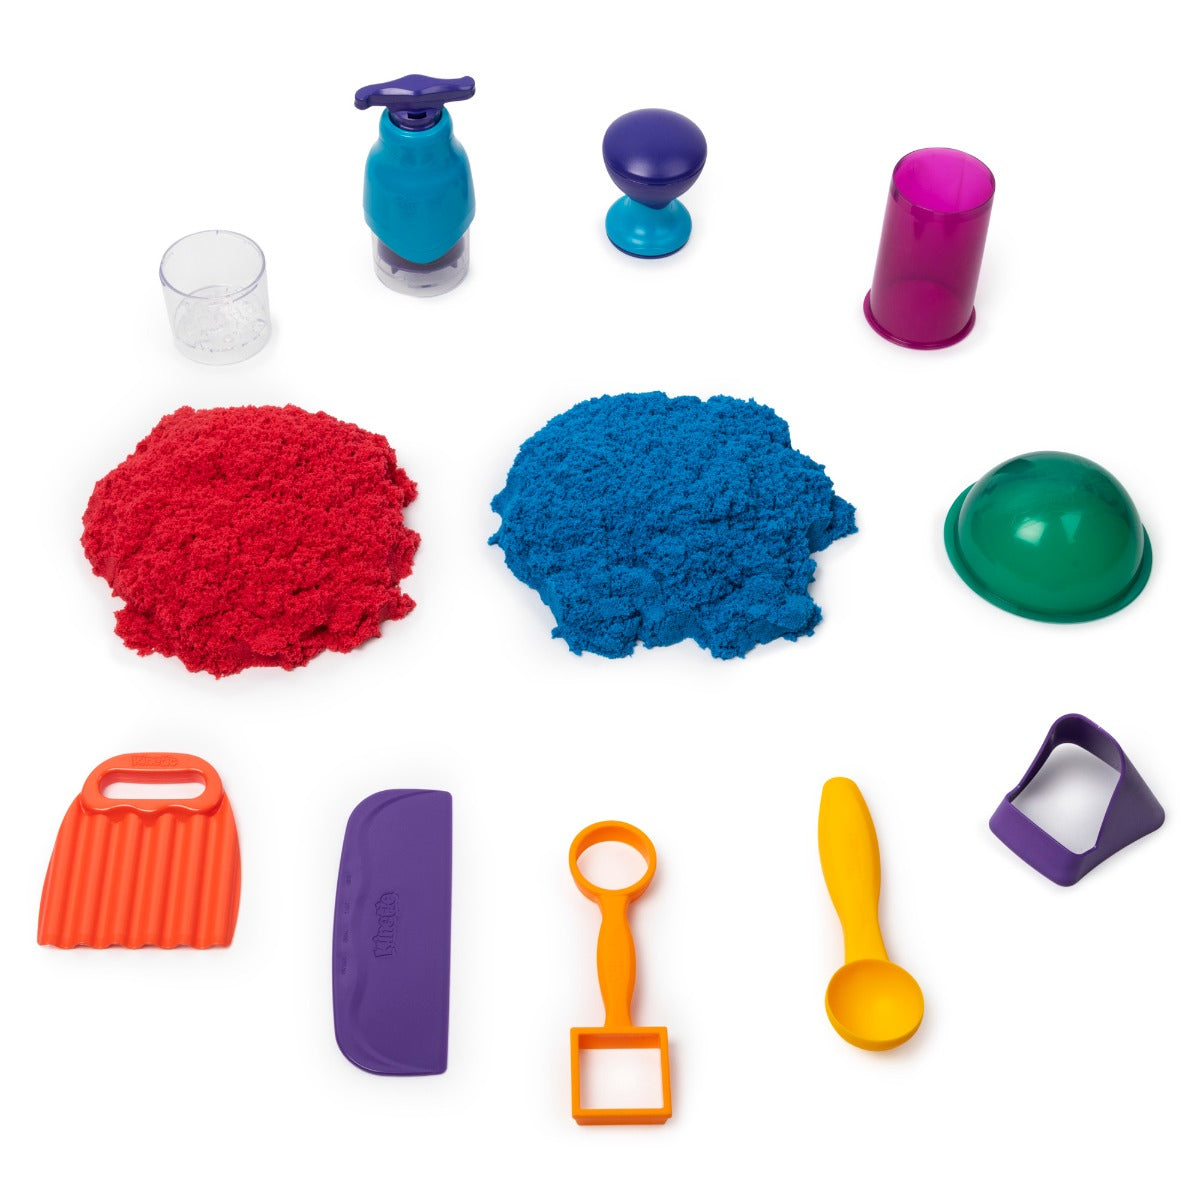 KINETIC SAND 6047232 sand cutting and shaping tool set